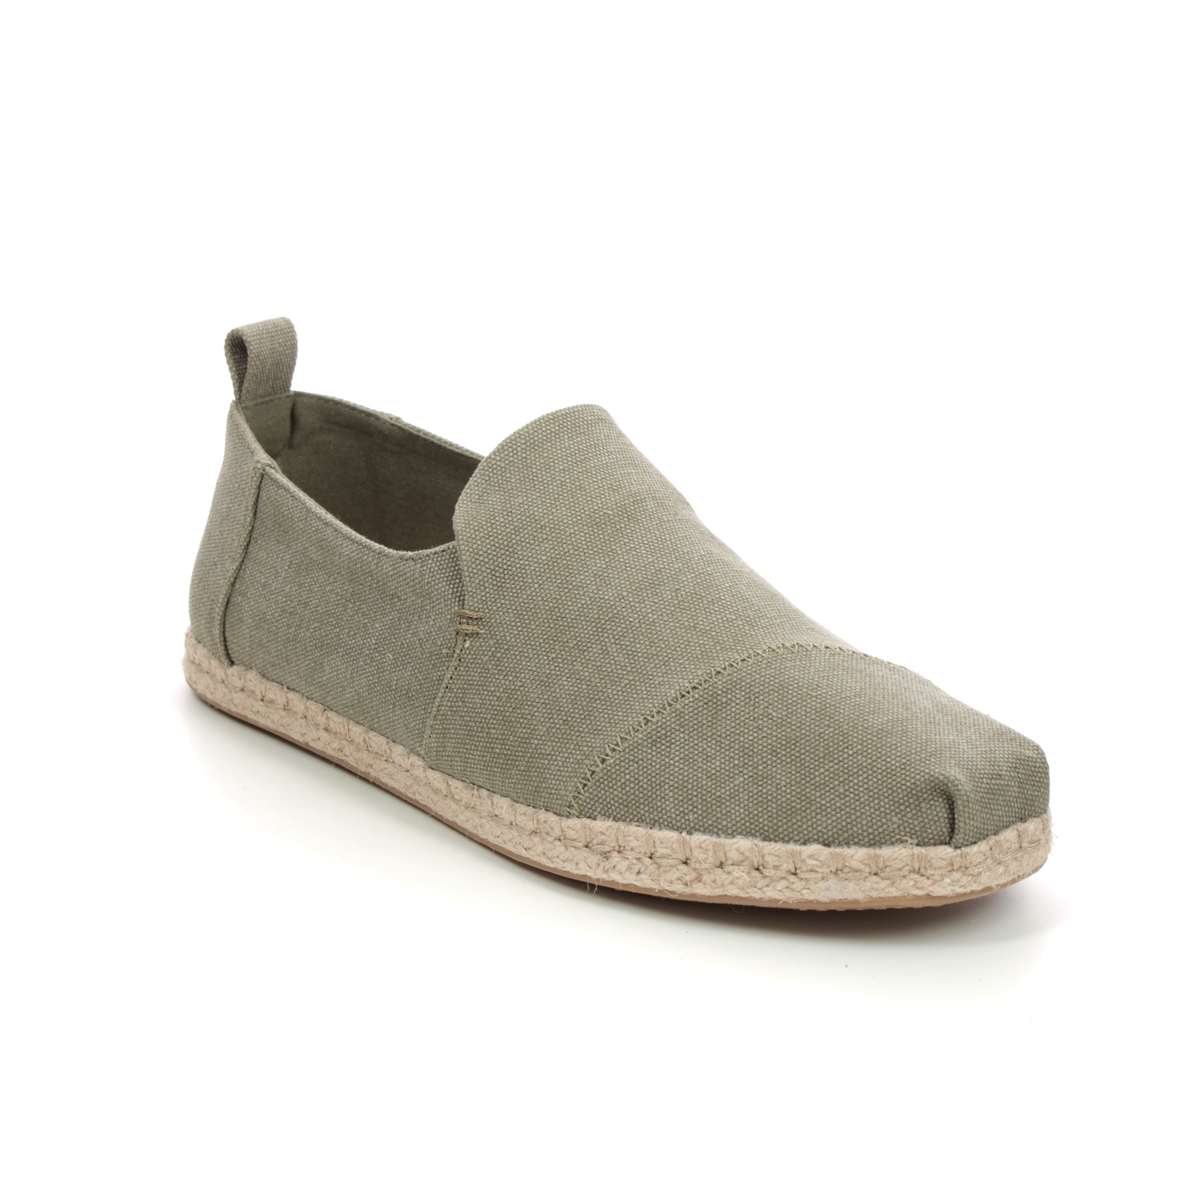 Toms Deconstructed 10011624- Olive Green Slip-on Shoes